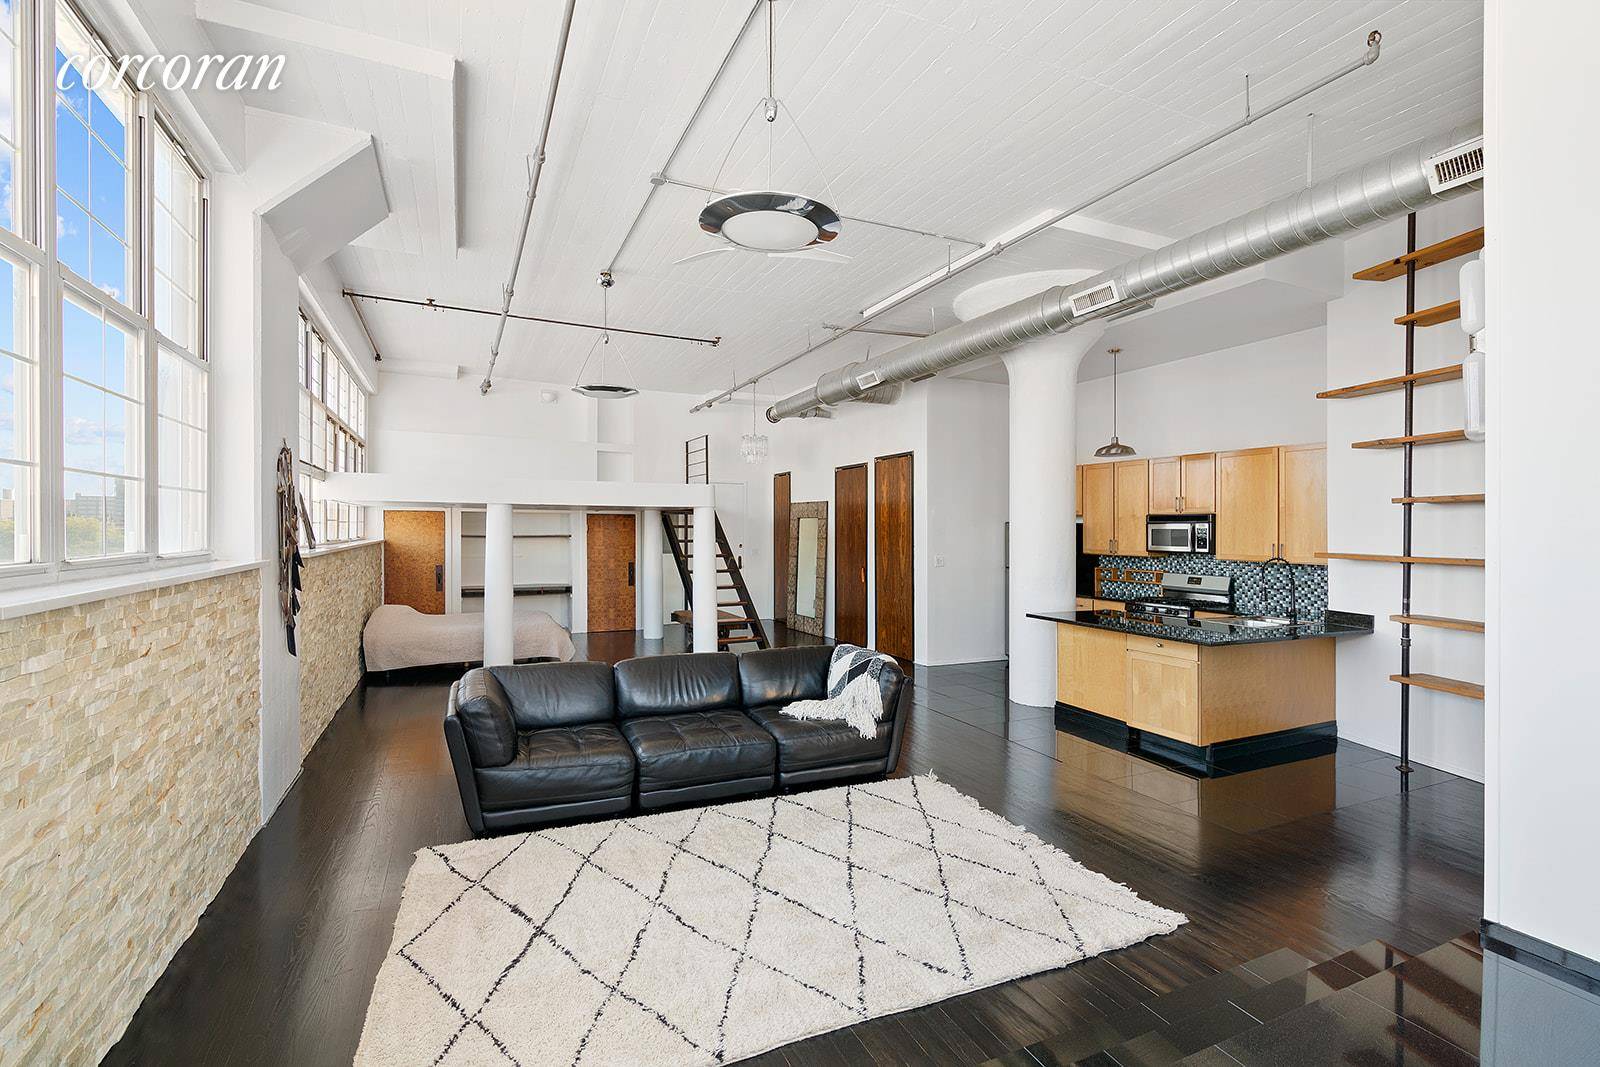 Find yourself enveloped in light and surrounded by sky the moment you step in the door of this dramatic and dynamic true industrial loft condo space.